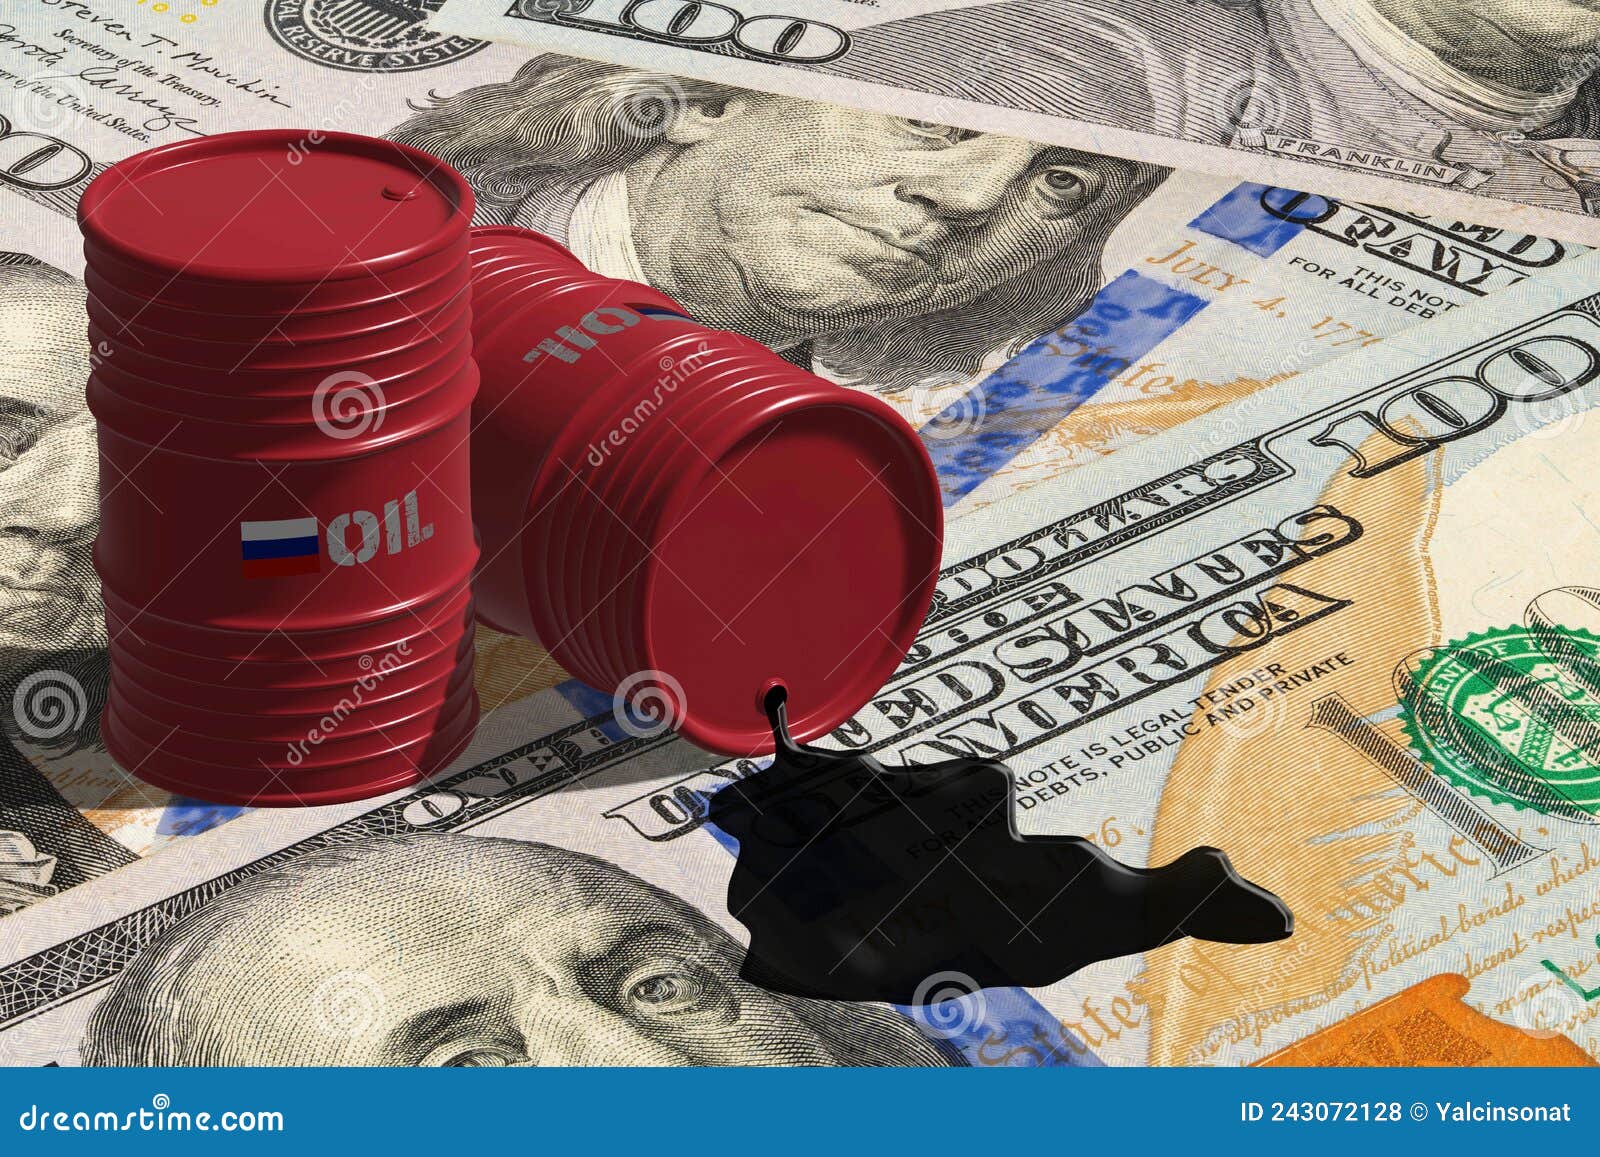 russian oil spilling from oil barrels on us dollars